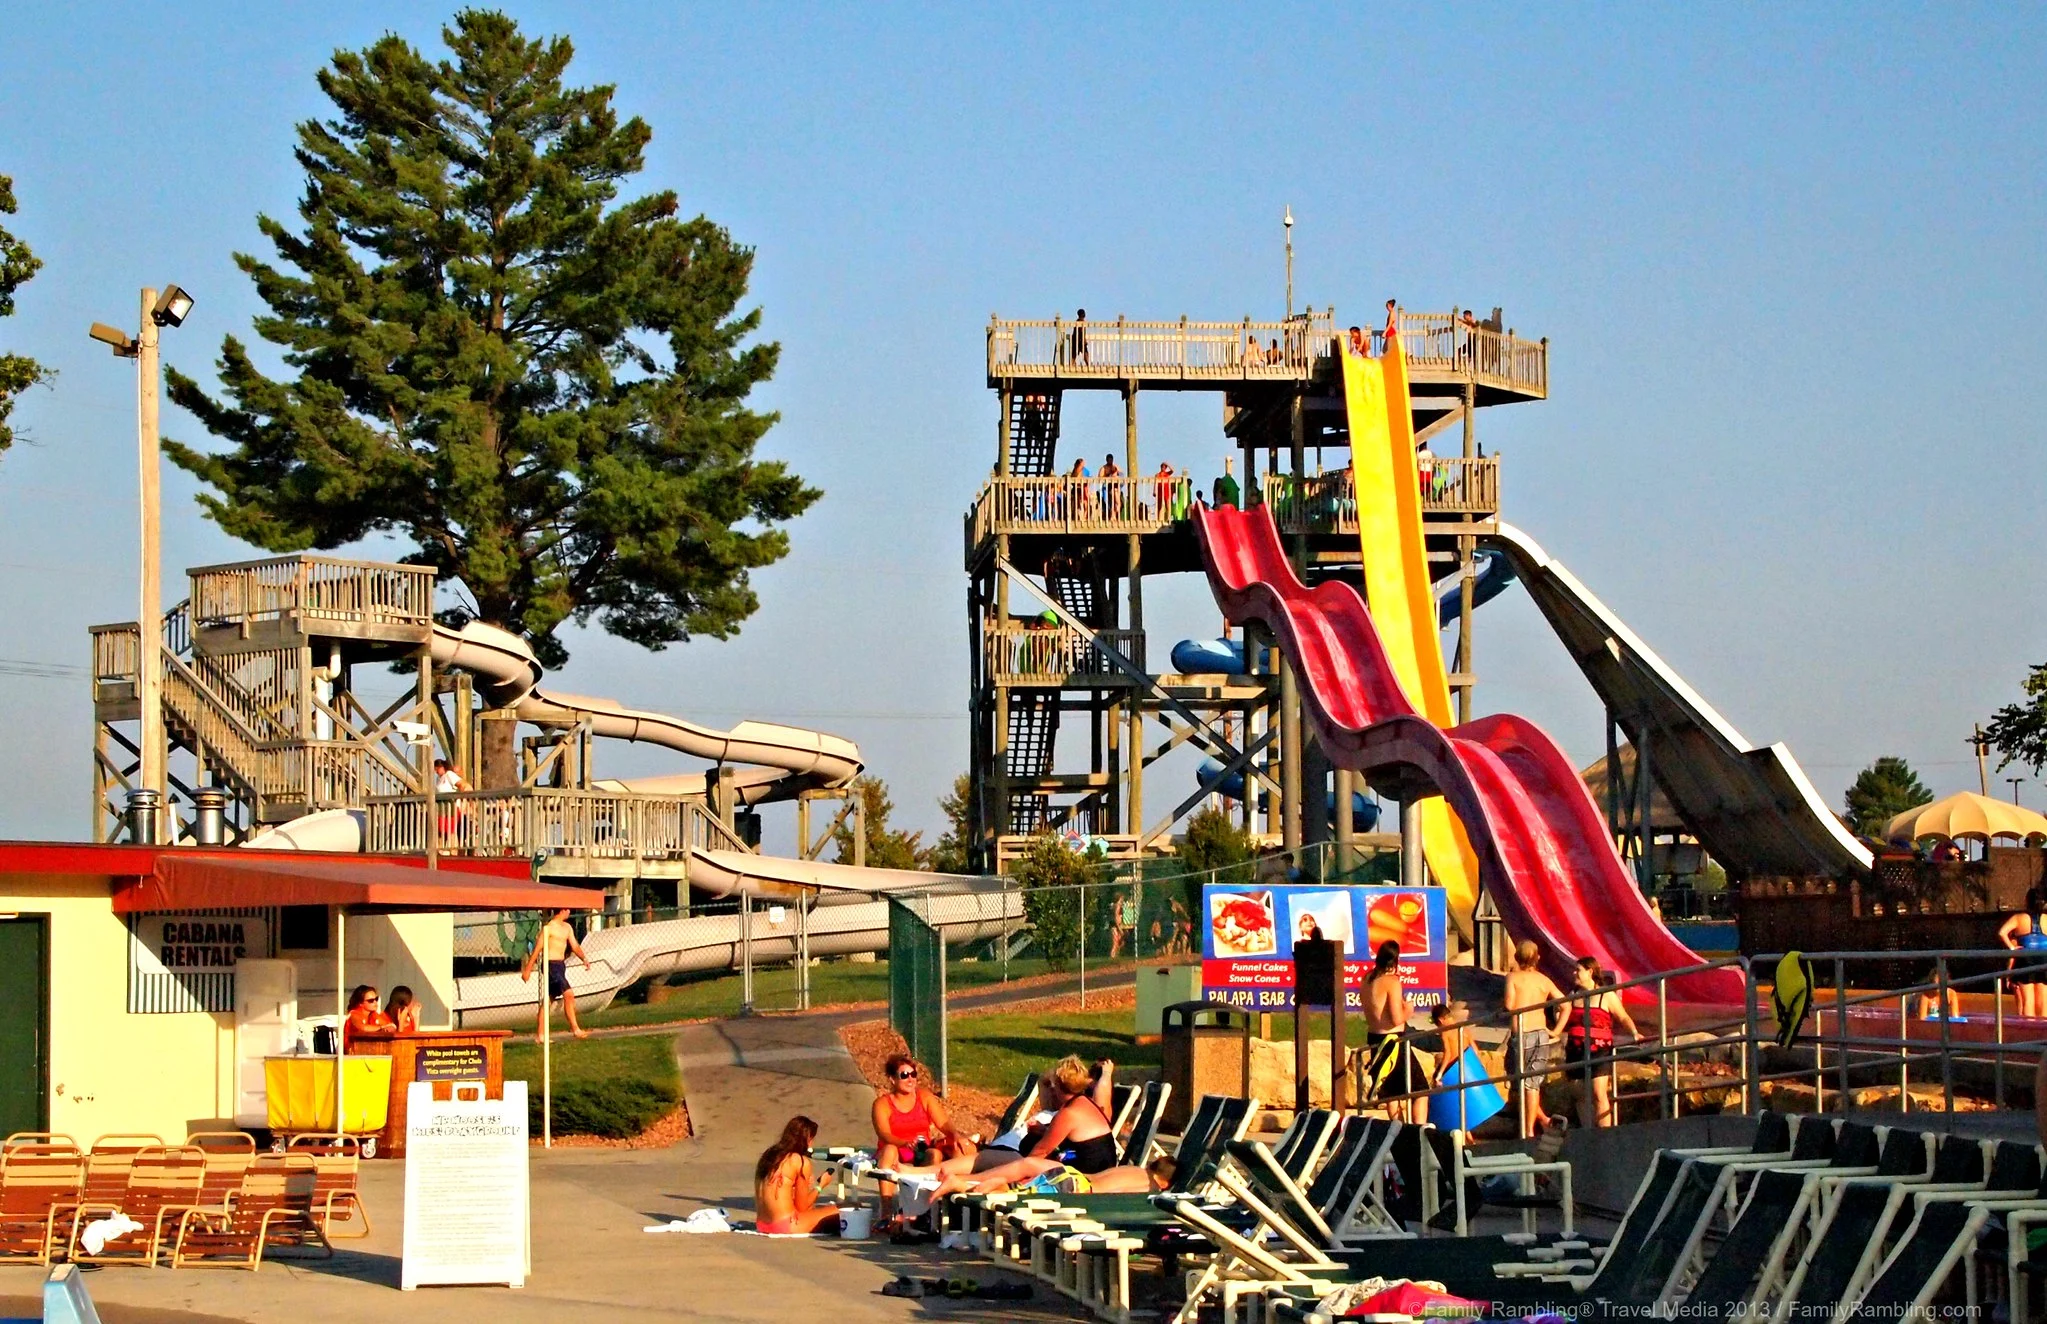 Visitors enjoying the hot sun and steep waterslides at Chula Vista Resort, one of the best Wisconsin Dells water parks